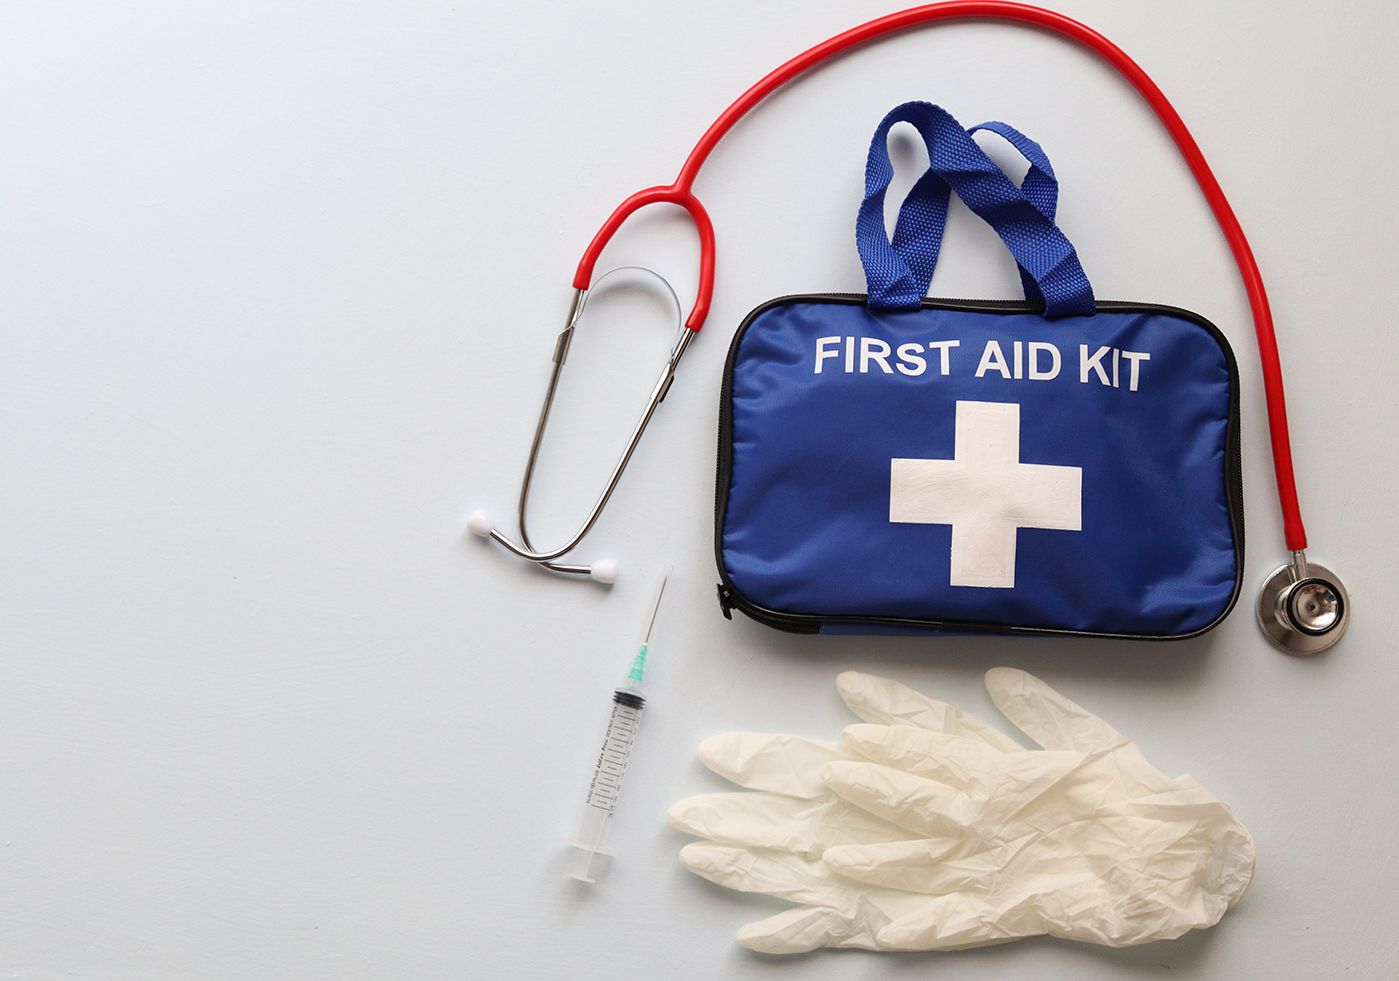 First aid kit and gloves